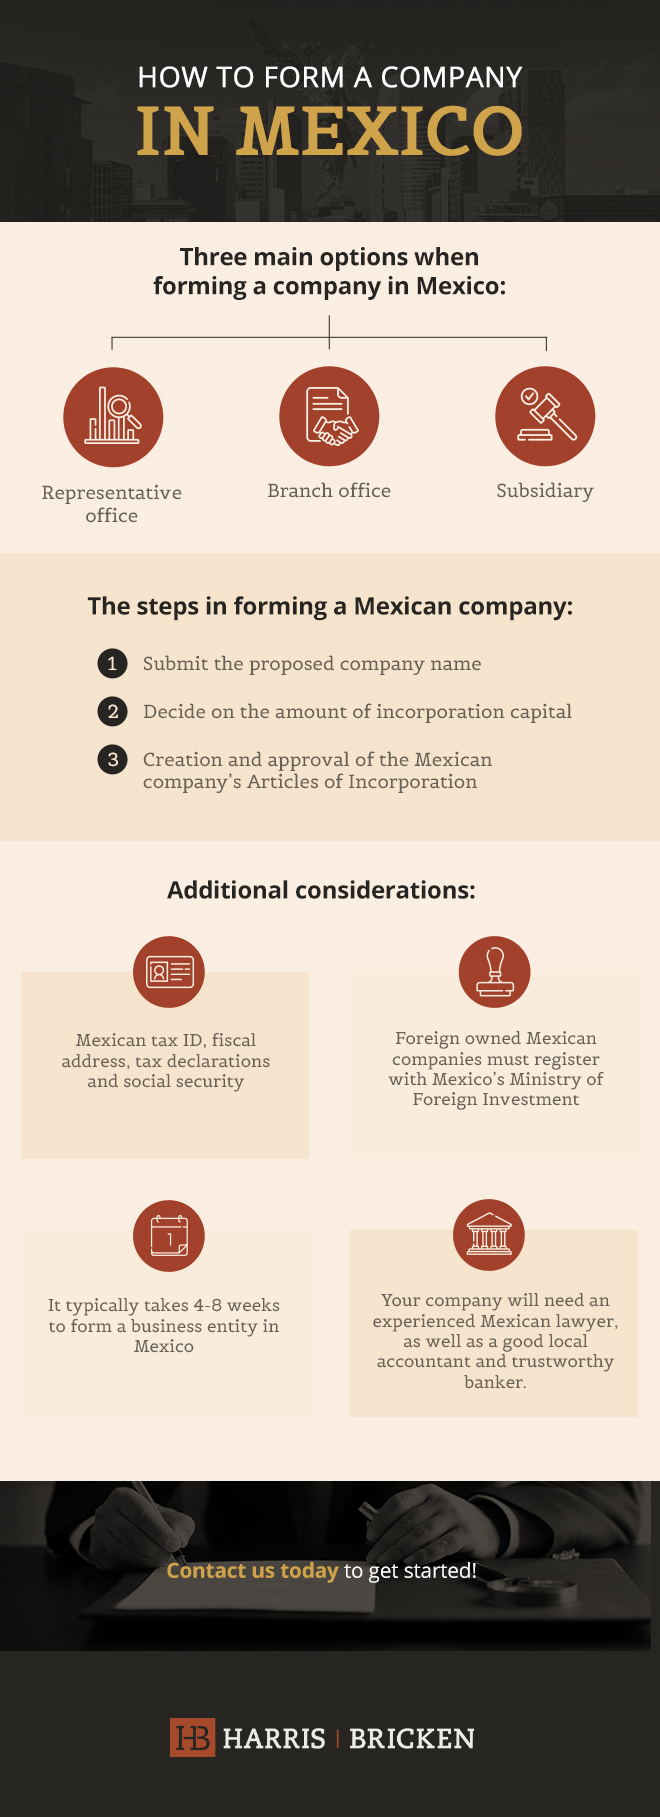 How to form a company in mexico